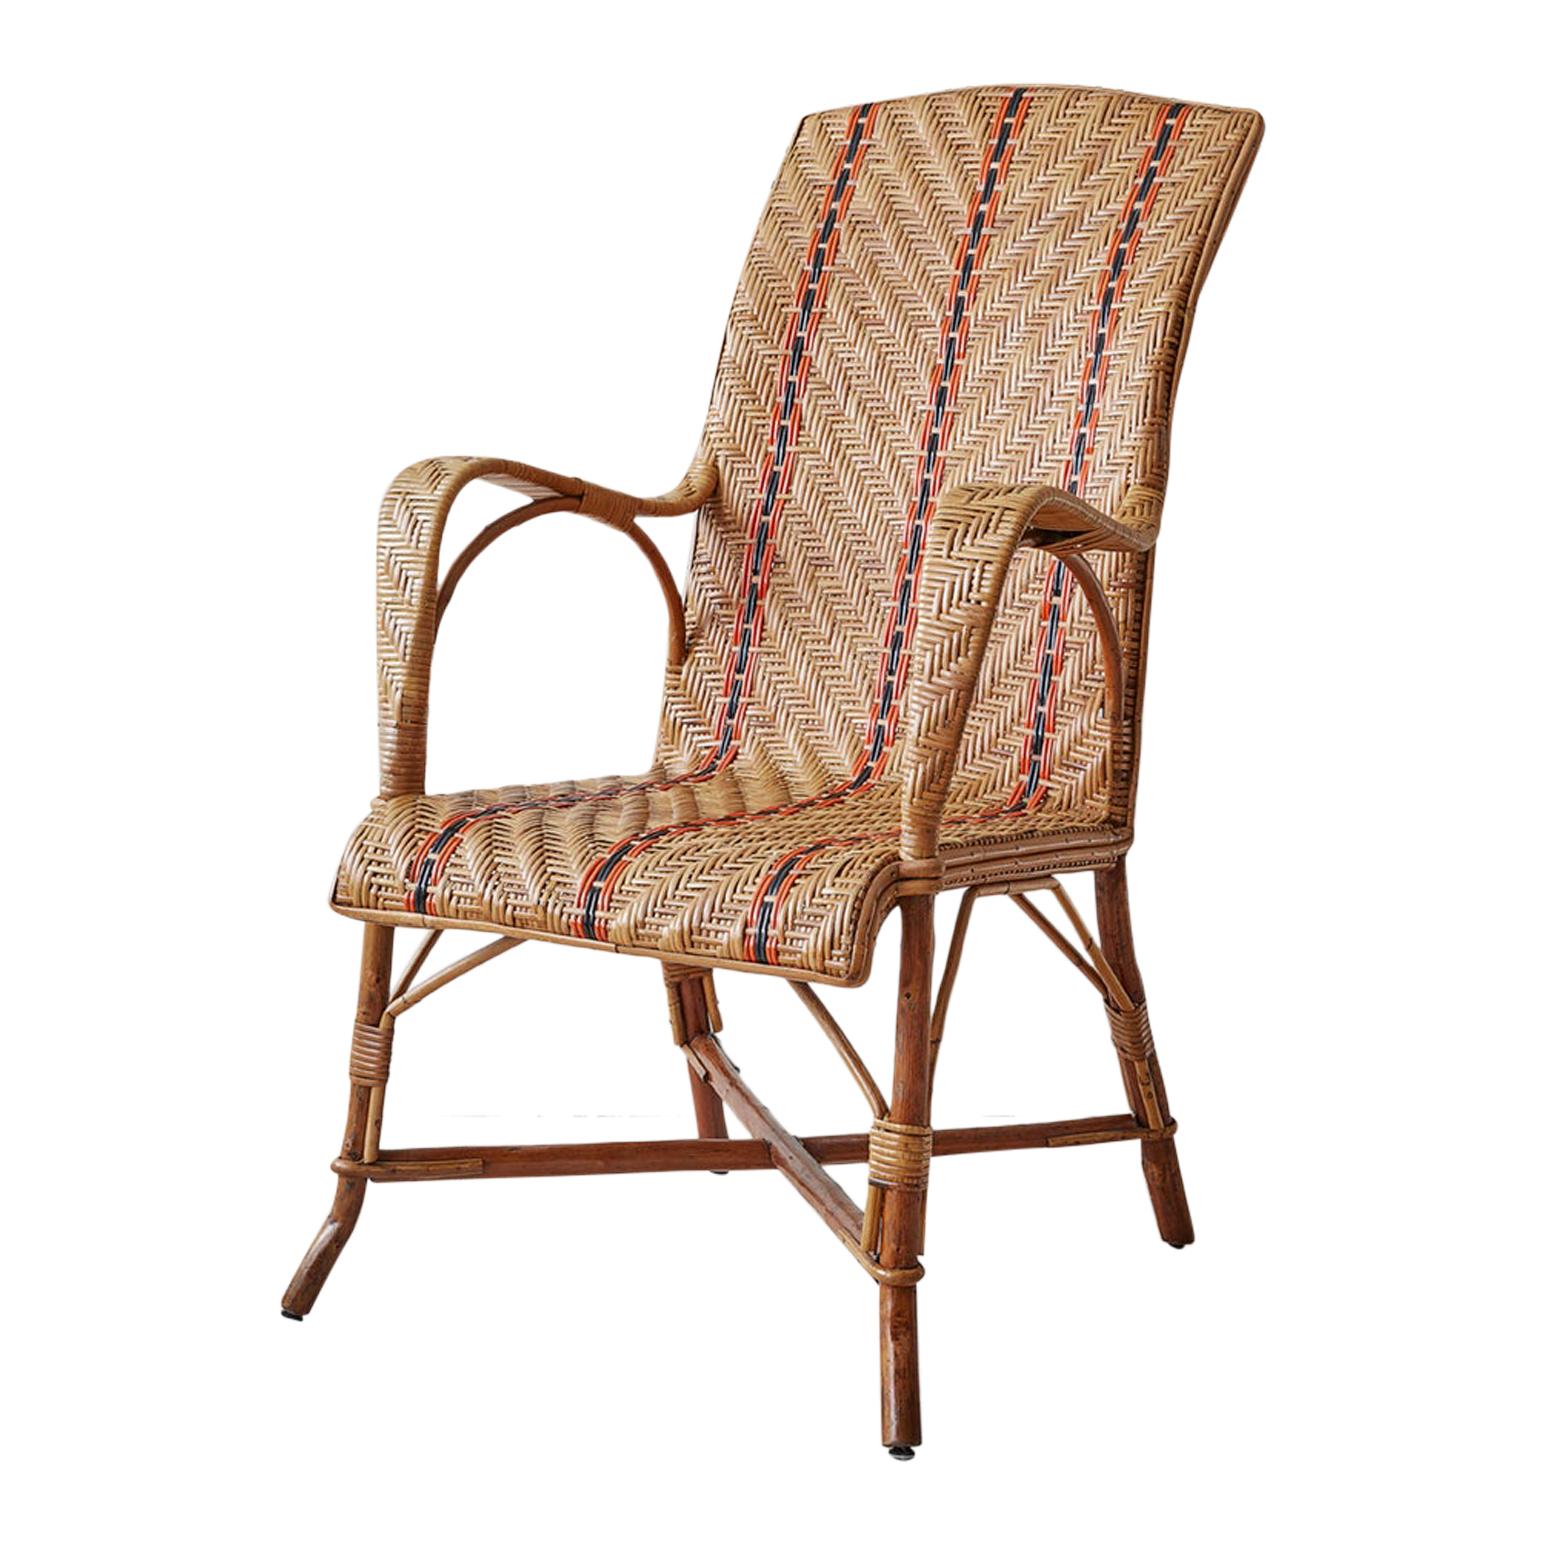 Vintage French Fauteuil, Rattan Armchair with Orange Stripes, 1930s